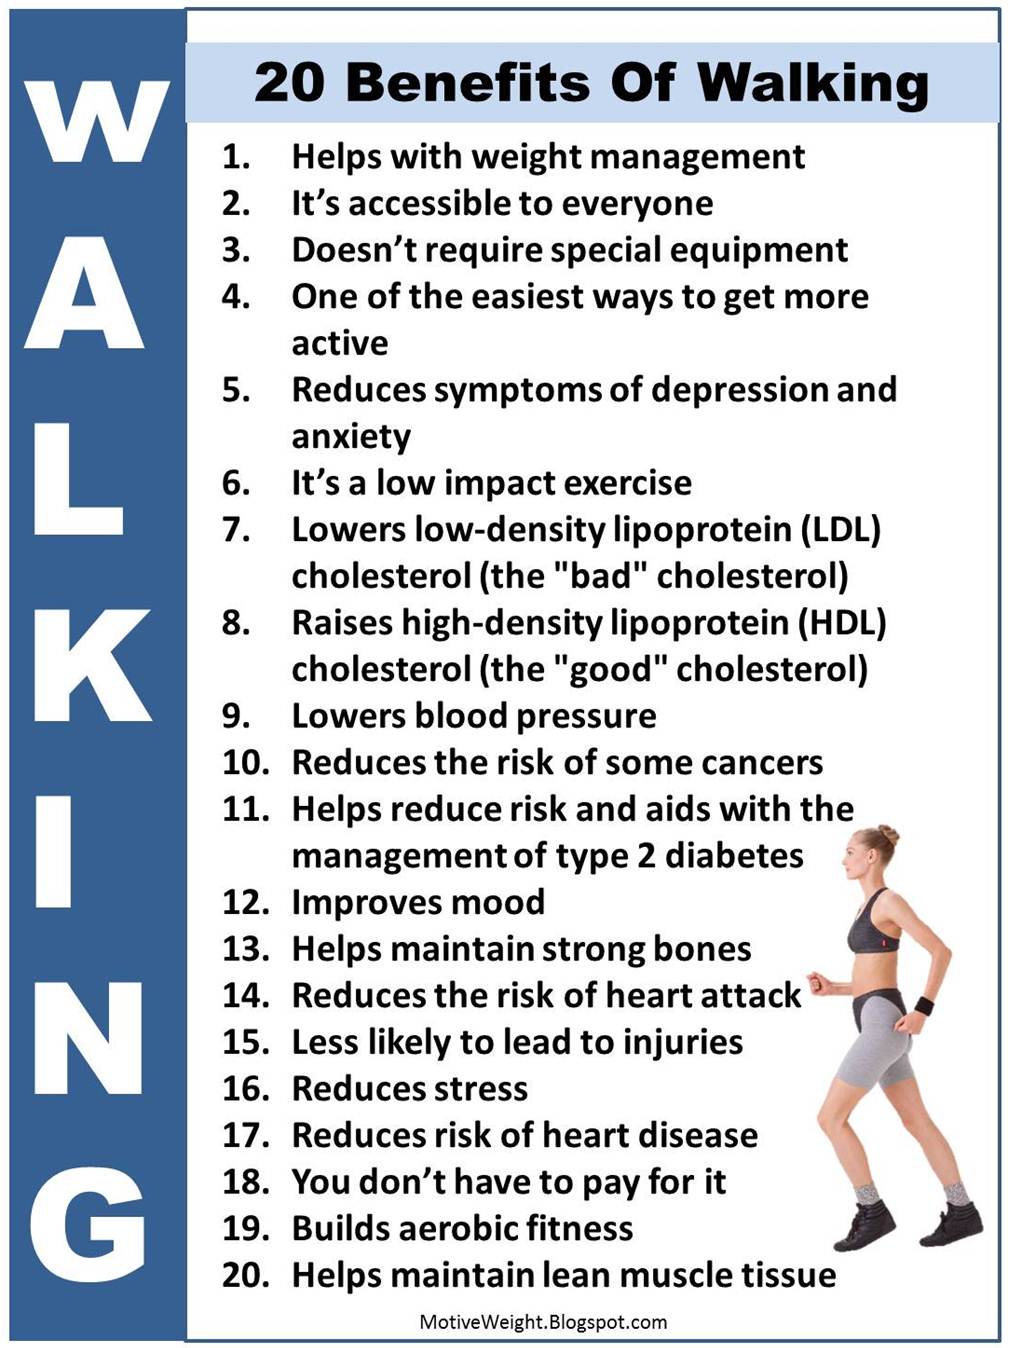 MotiveWeight: 20 Benefits Of Walking For Exercise